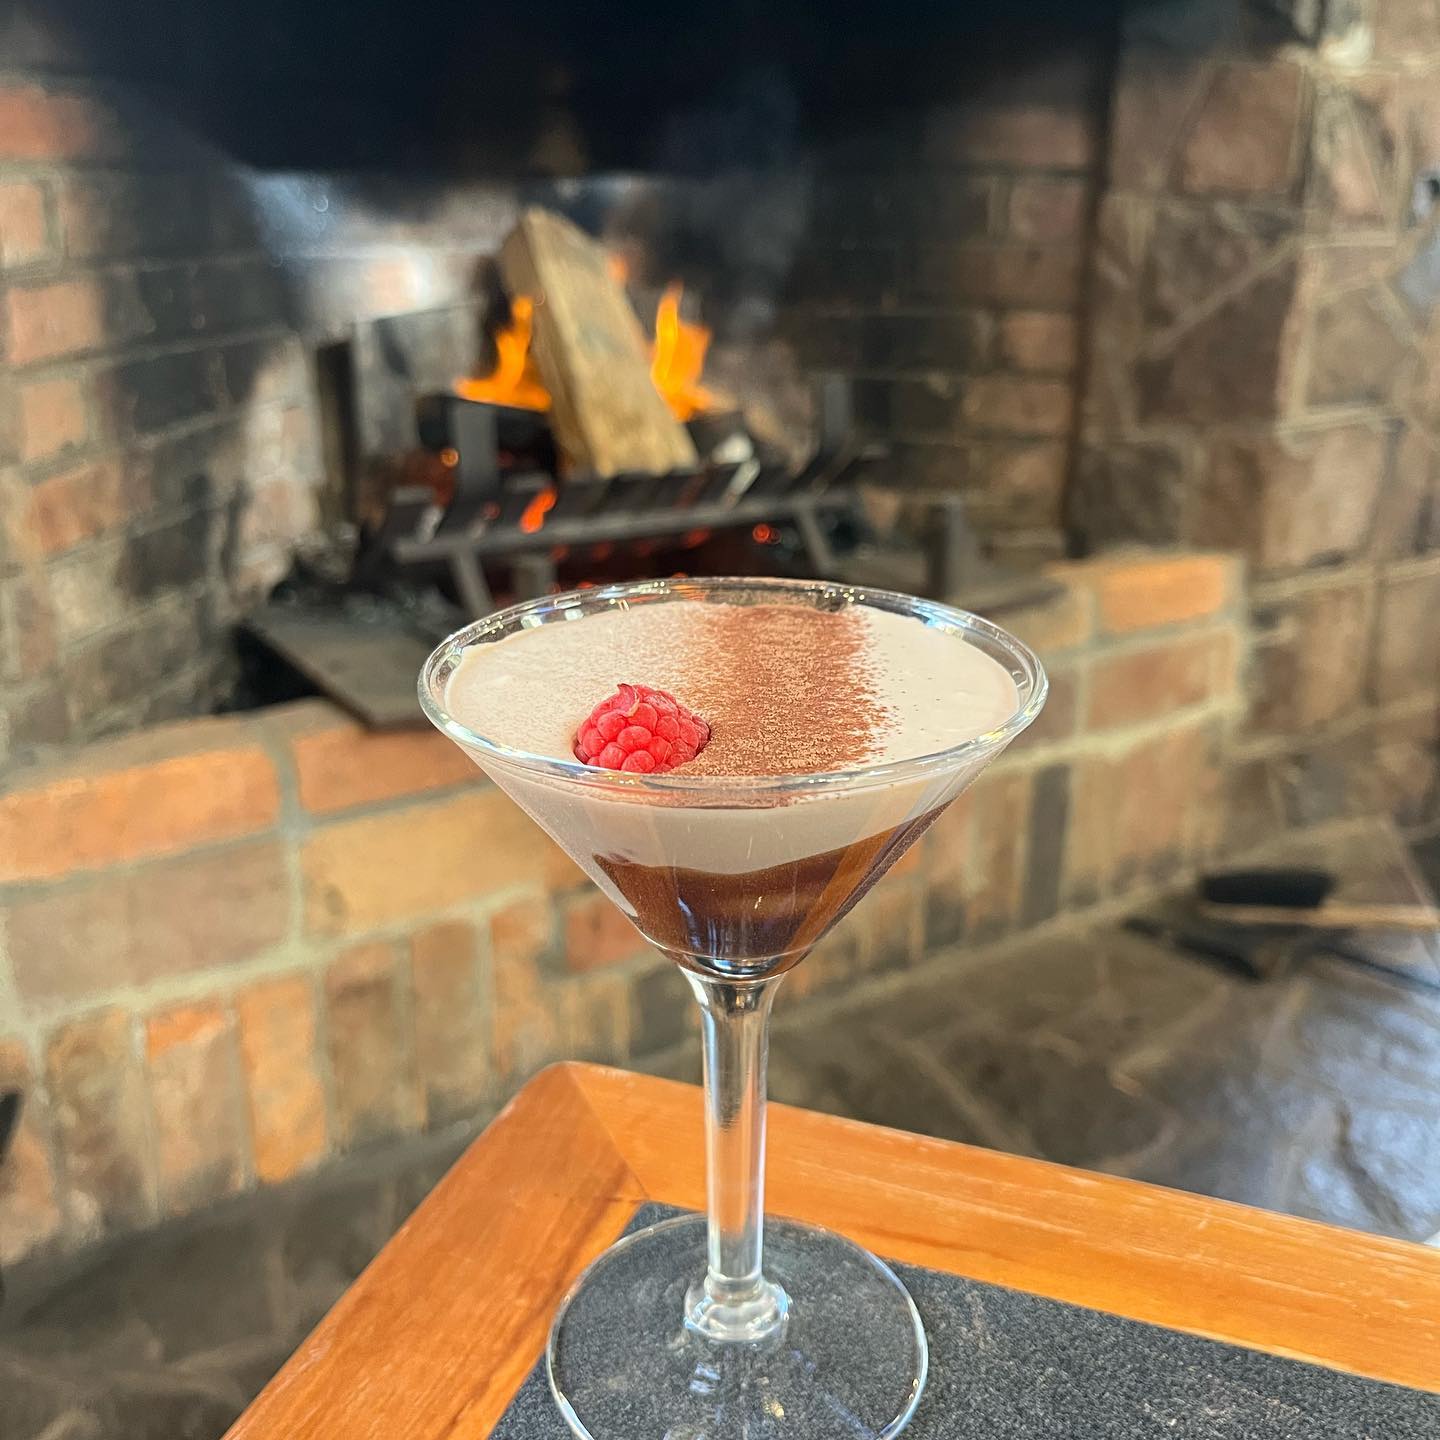 Enjoy our cocktail special this weekend, the Choc Raspberry Decatini! Drop in to enjoy one with lunch in front of our open fire 🔥 Bookings encouraged, call (03) 6262 2186 to reserve your table.